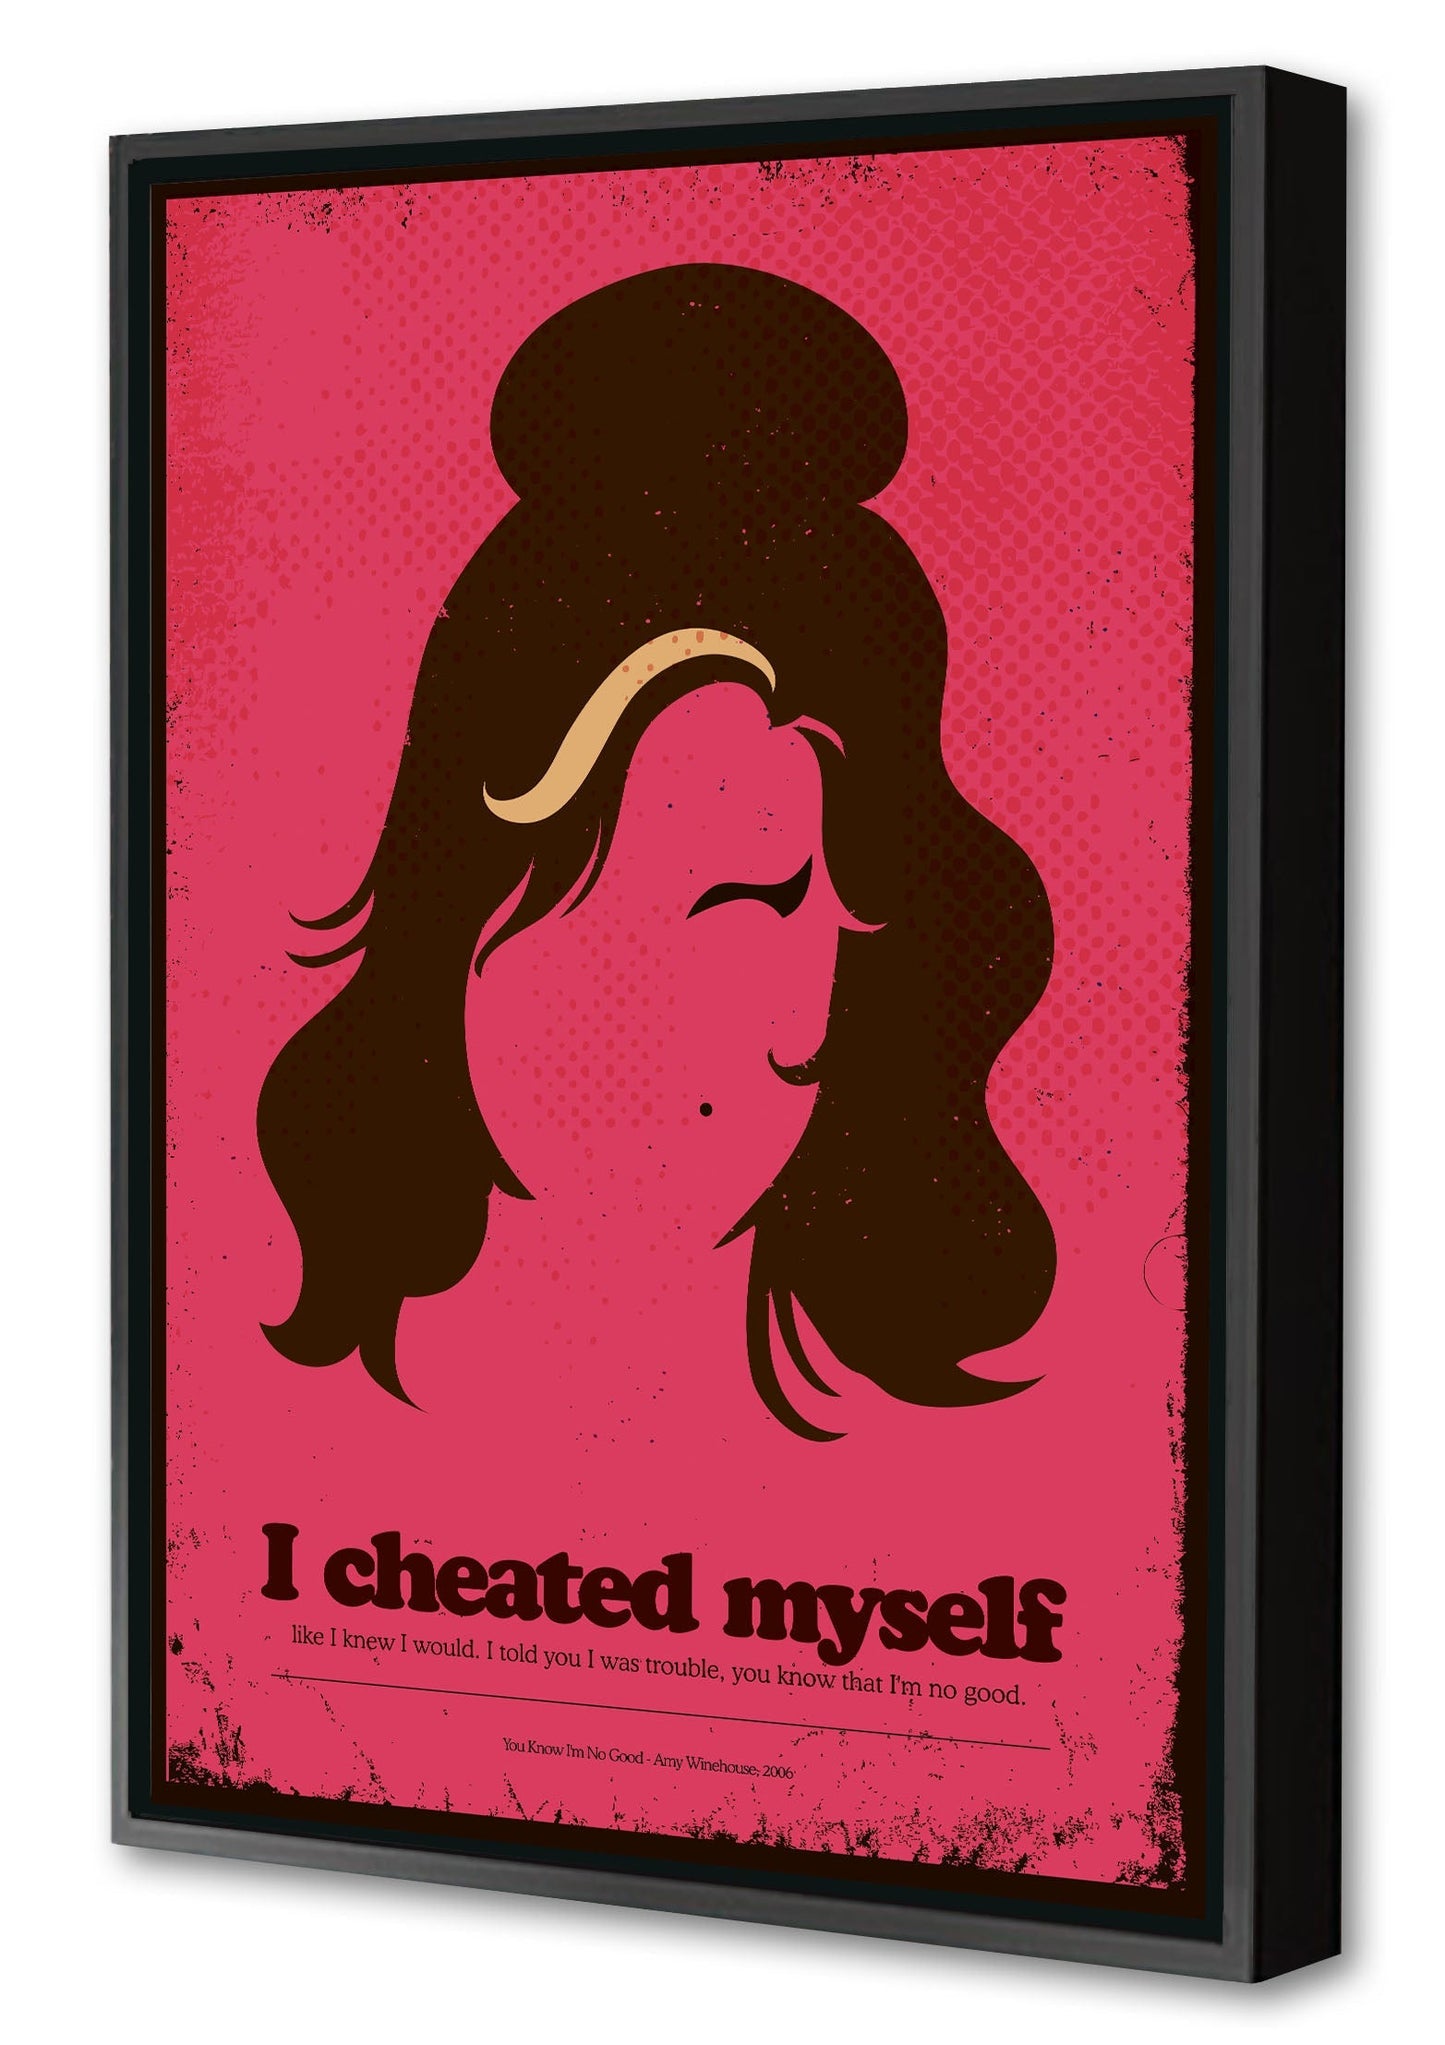 Amy Winehouse - I cheated myself-concerts, print-Canvas Print with Box Frame-40 x 60 cm-BLUE SHAKER